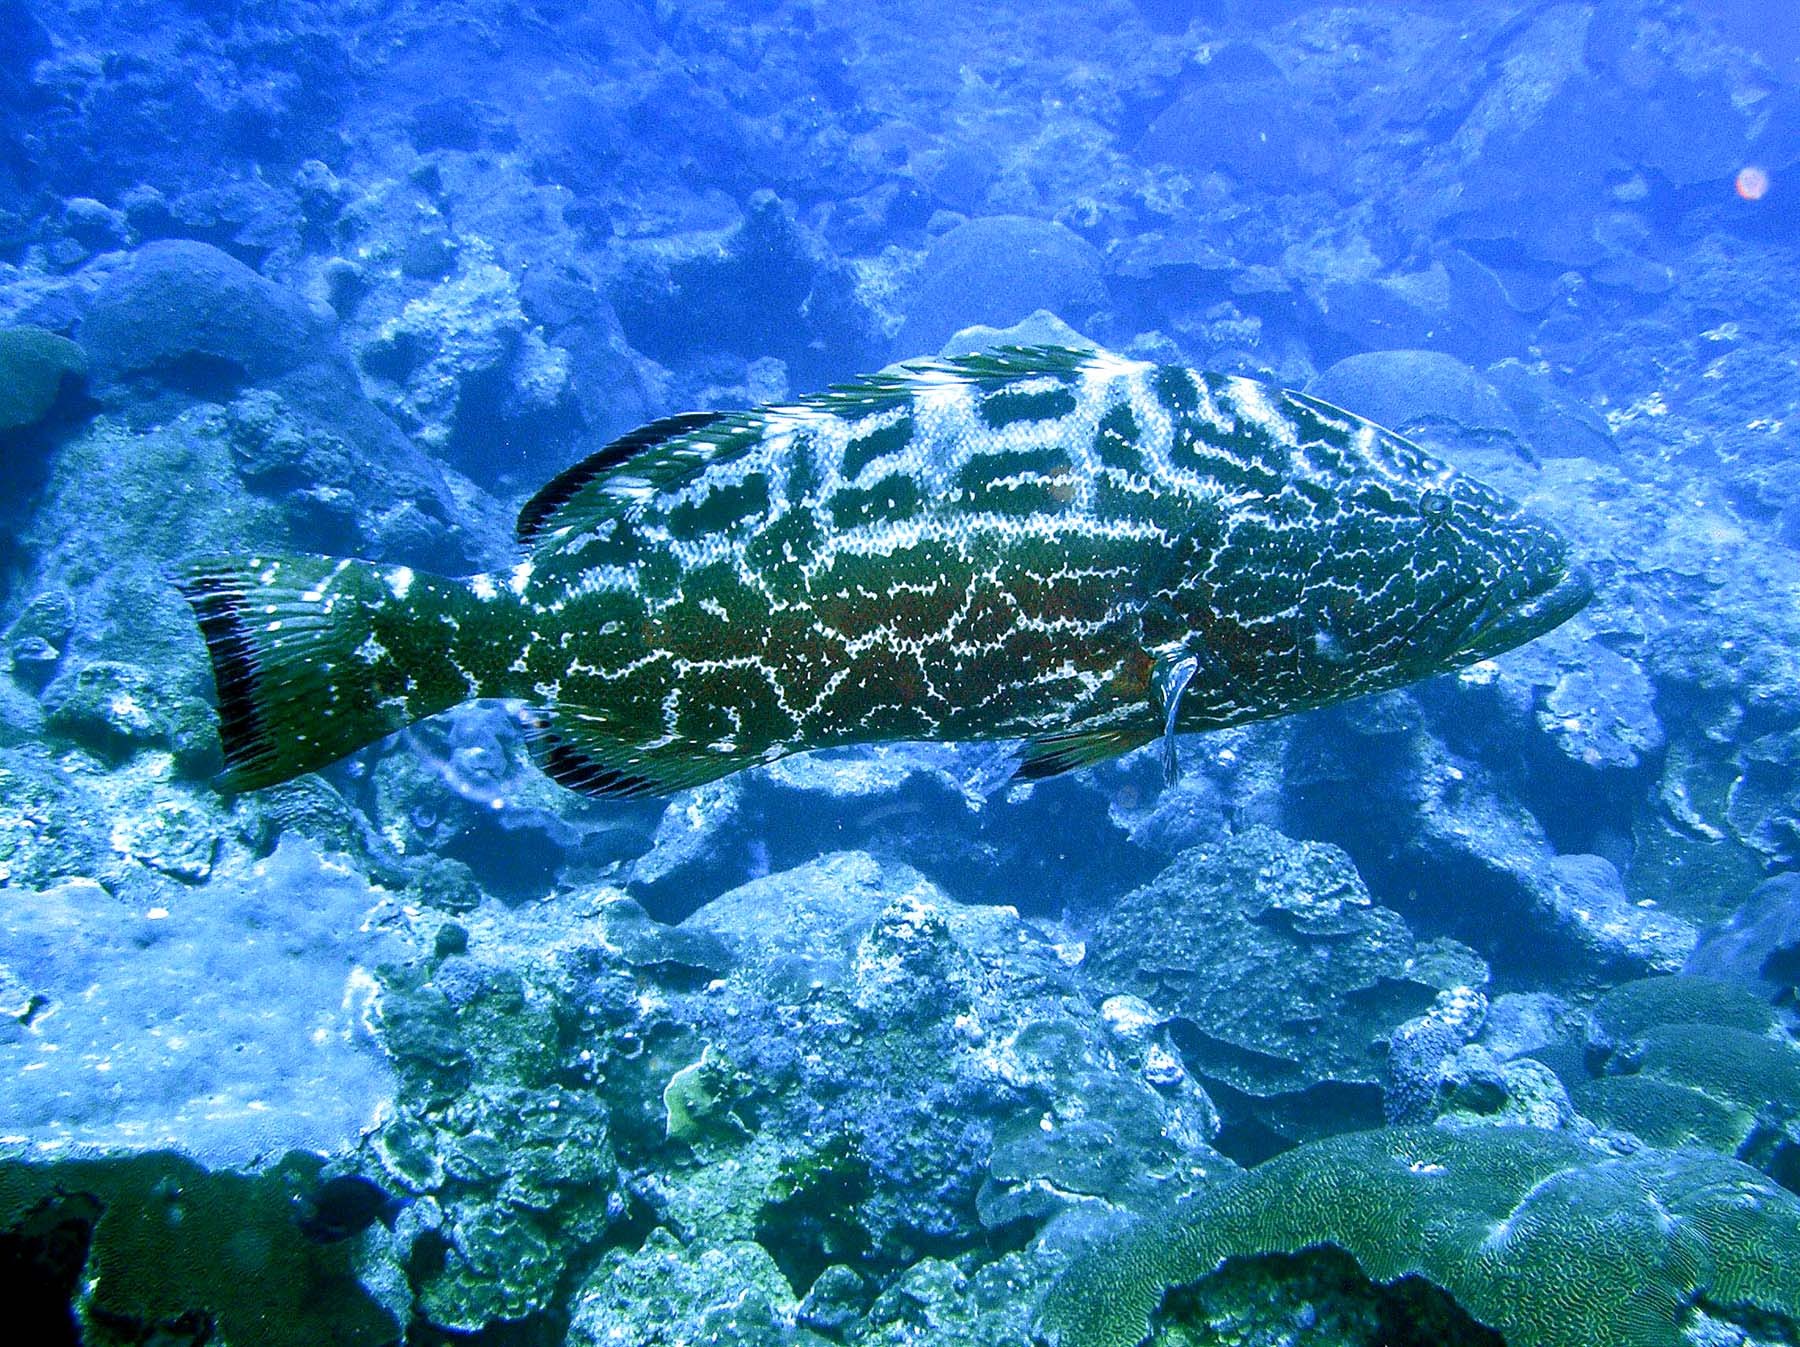 Grouper and butterfly fish are just a few of the species you will see in the sanctuary waters. (photo courtesy of NOAA)